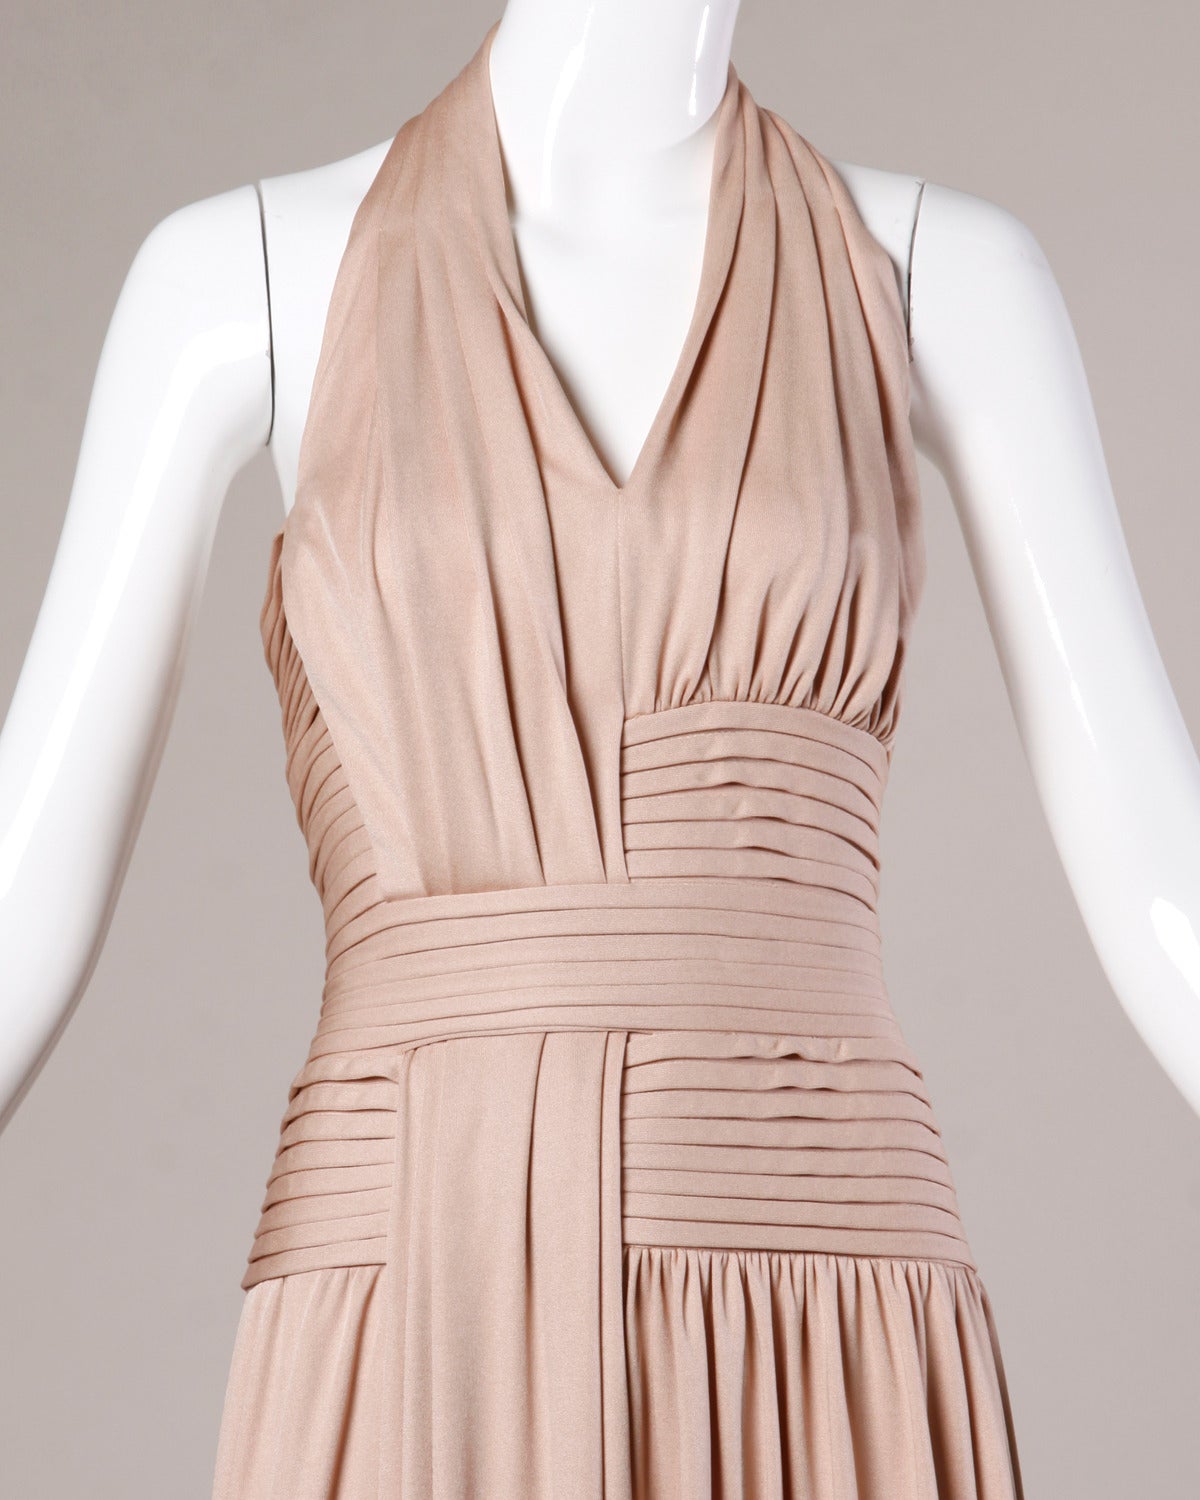 Unworn vintage nude silk jersey halter gown by Rizkallah for Don Friese. Amazing asymmetric construction and plunging neckline. This dress is so flattering on the body!

We originally received this with the original tags attached in unworn